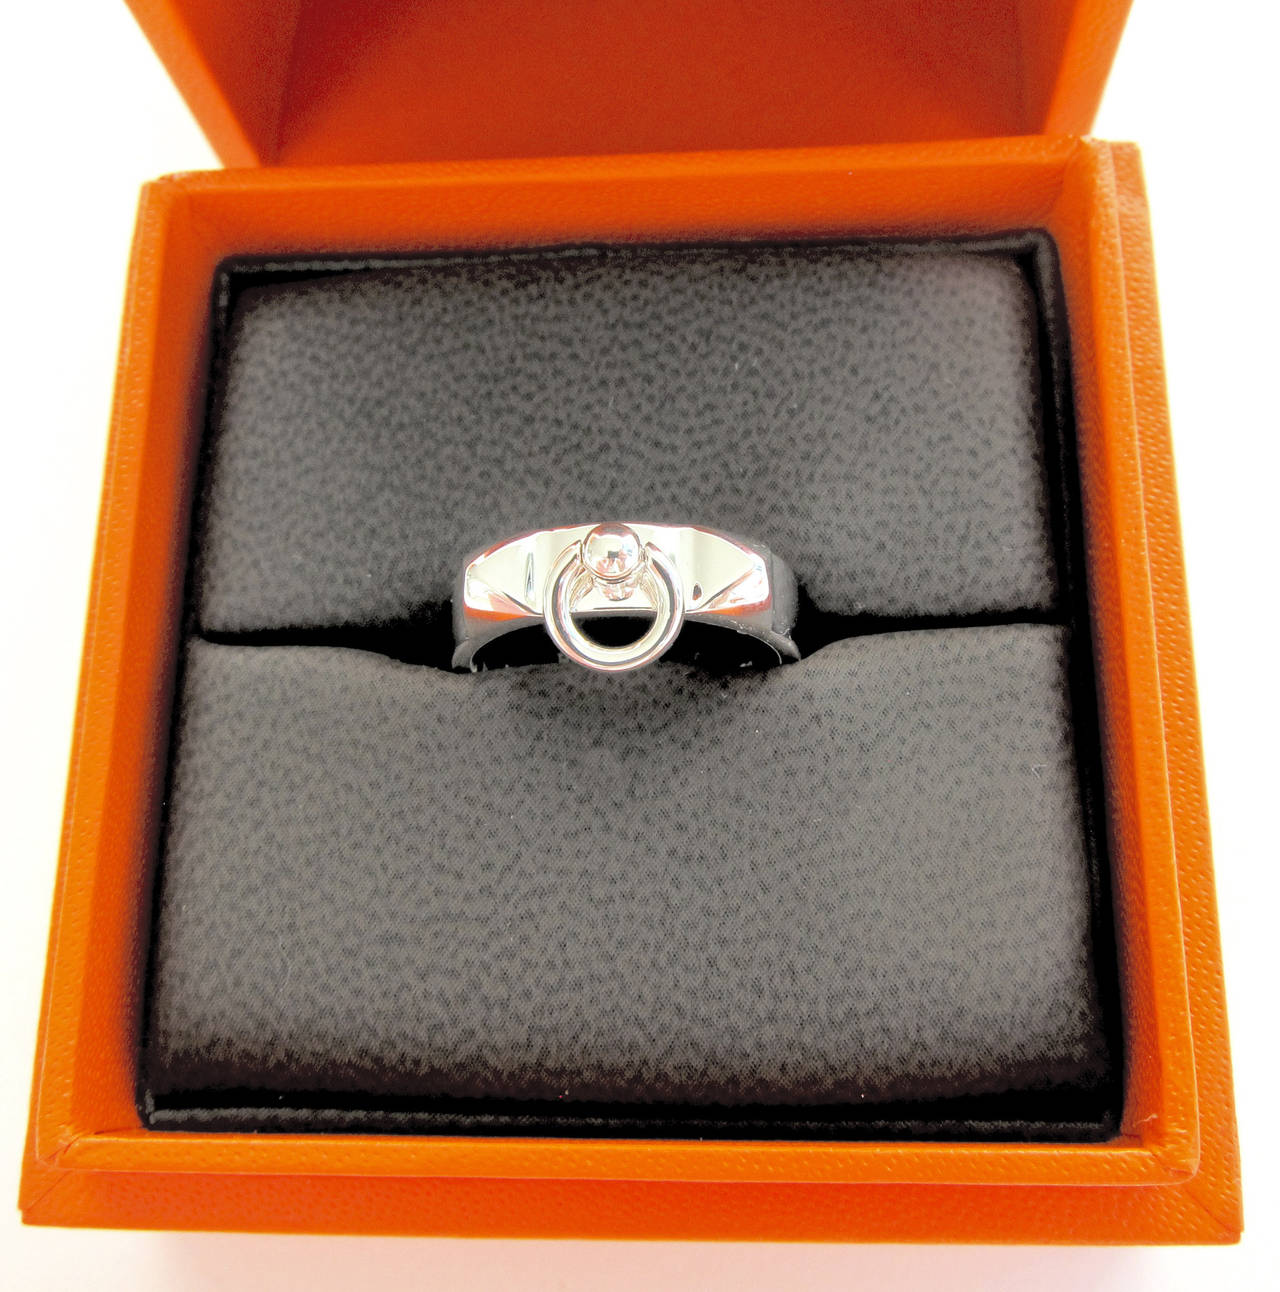 Hermes Collier de Chien PM Silver Ring 6.5 or 54 Delicate Below Retail

Precious silver ring from Hermes
Brand New. Full set with Hermes jewelry box and ribbon. 
BELOW RETAIL (currently $778 including tax where we are).
Collier de Chien is a